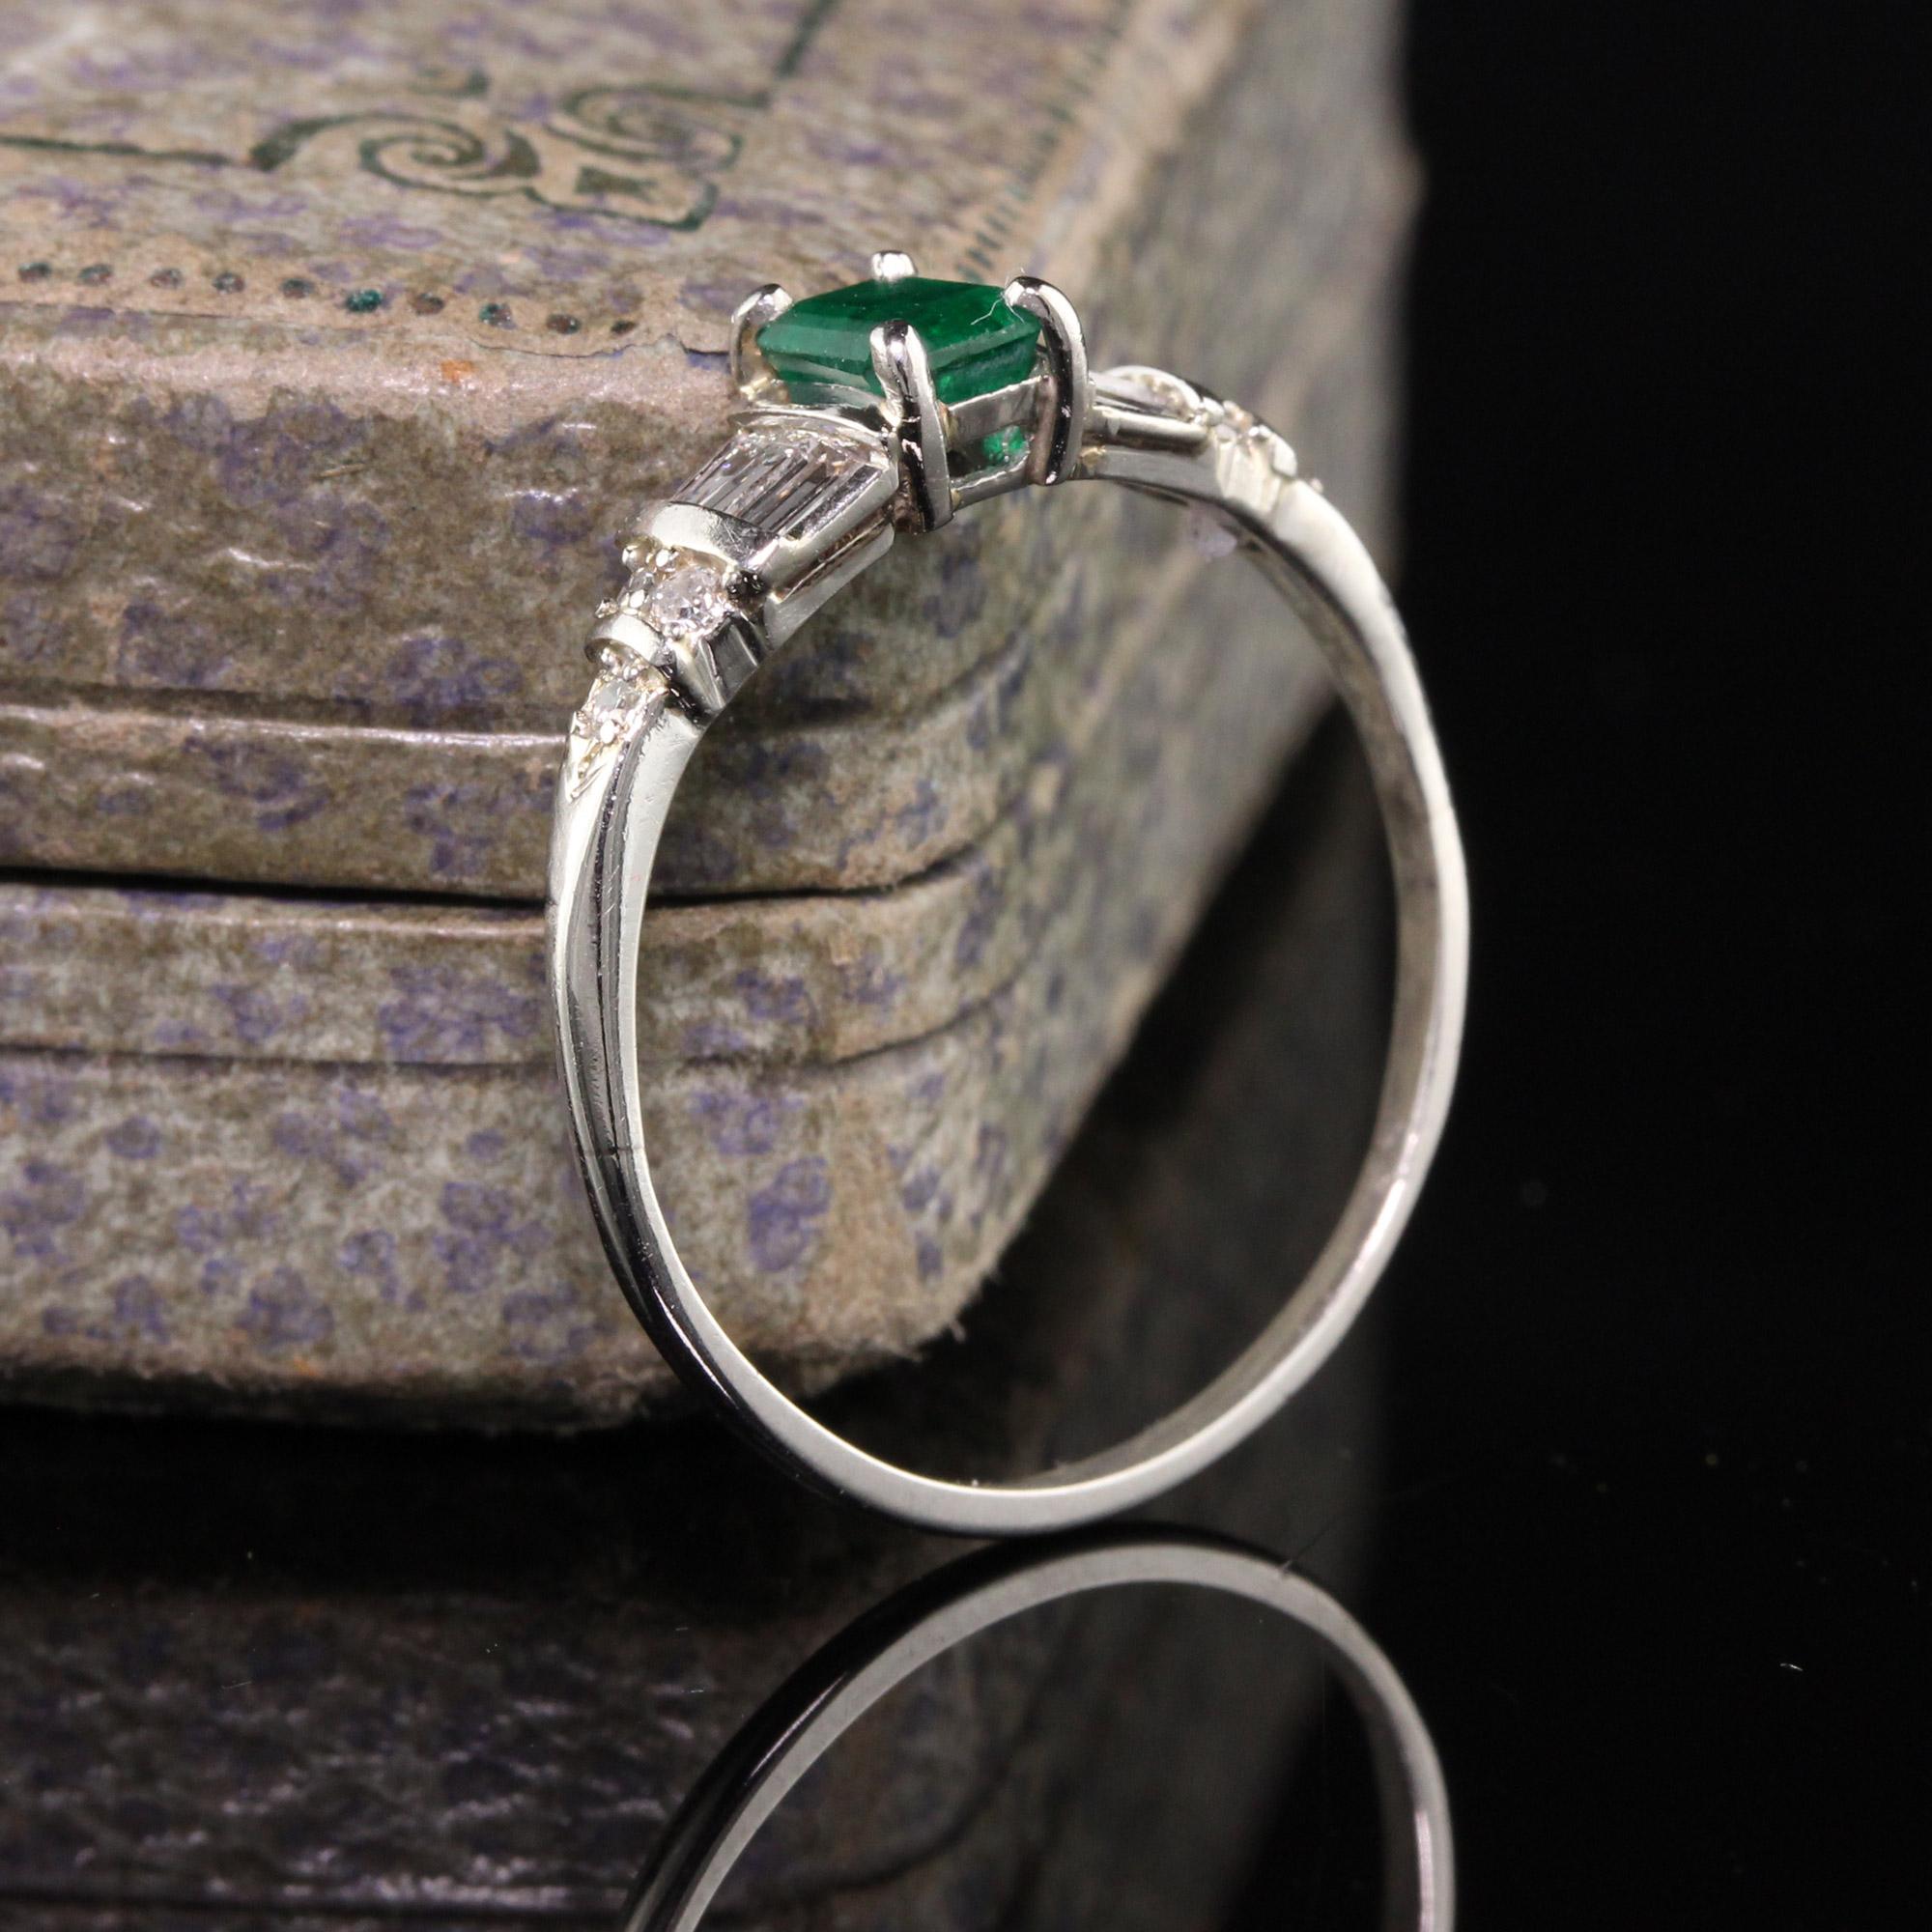 Beautiful Vintage Retro Platinum Emerald and Diamond Engagement Ring. This beautiful ring has a nice Emerald in the center of a platinum mounting with baguette diamonds.

Item #R0818

Metal: Platinum

Diamond: Approximately .40 ct

Color: